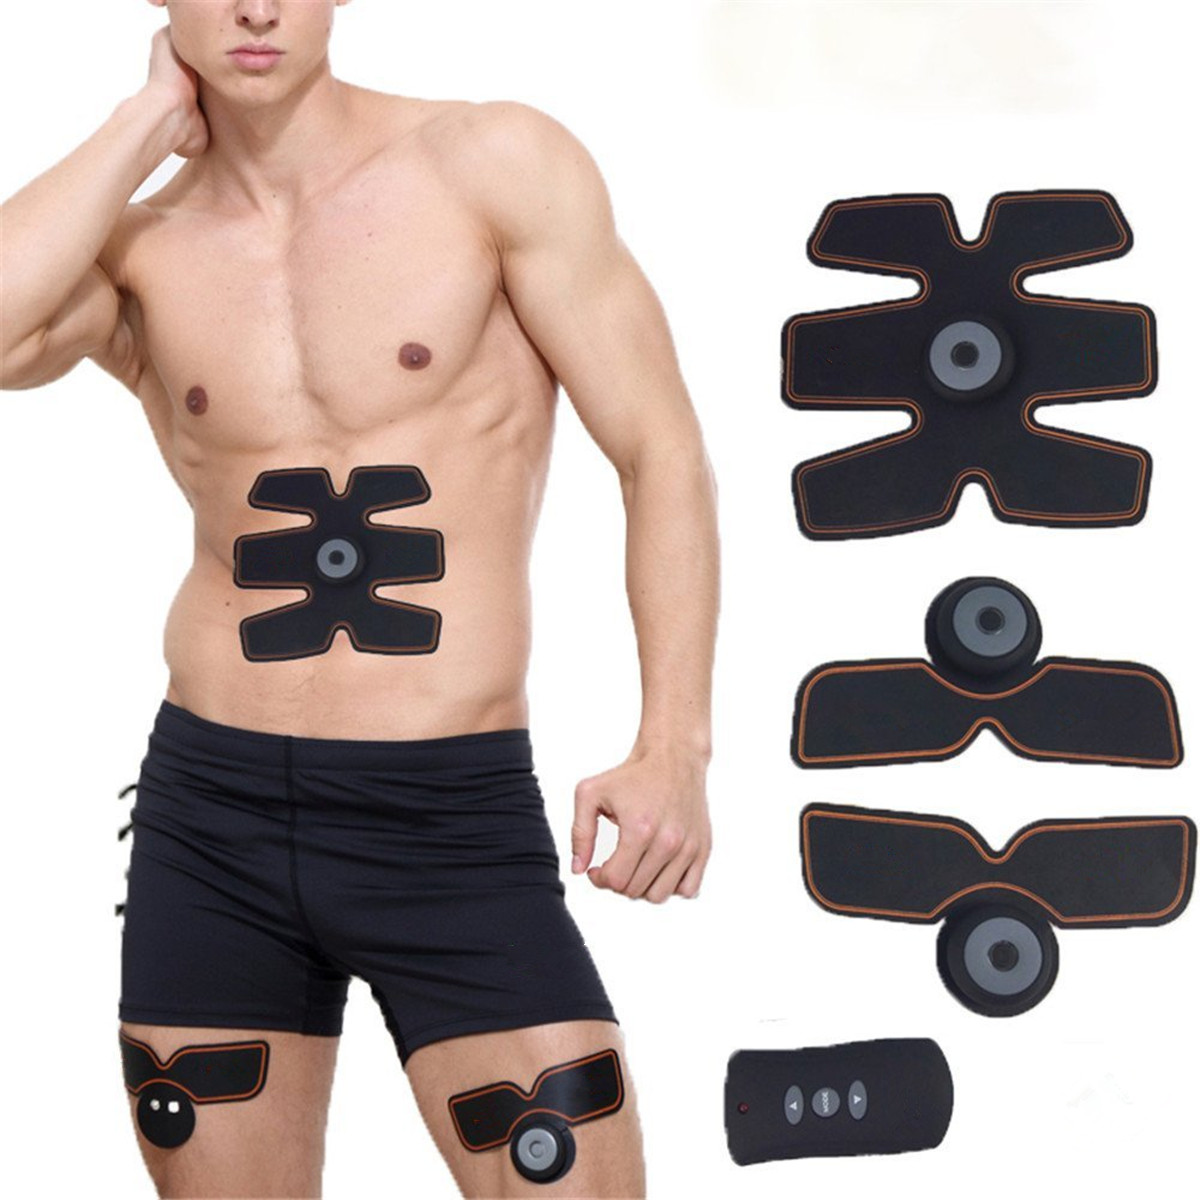 Intelligent-Remote-Fitness-EMS-Abdomen-Muscle-Toning-Trainer-Slimming-Apparatus-1151696-1